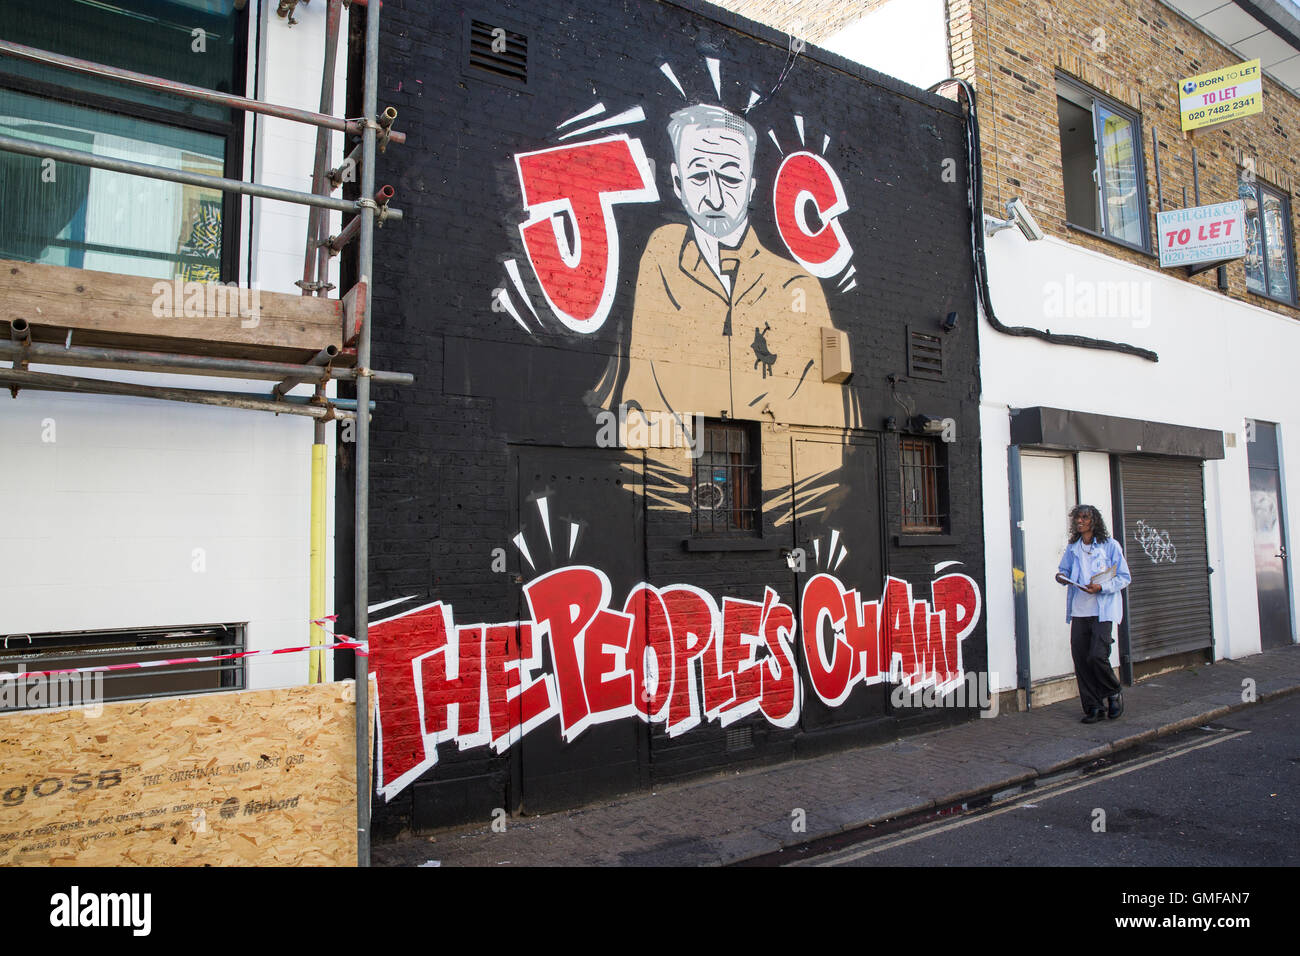 London, UK. 26th Aug, 2016. A man walks by a wall painted in support of Labour Party leader Jeremy Corbyn in the London borough of Camden. Corbyn is battling Owen Smith for leadership of the Labour Party which is to be decided on September 24, 2016. Credit:  Joel Ford/Alamy Live News Stock Photo